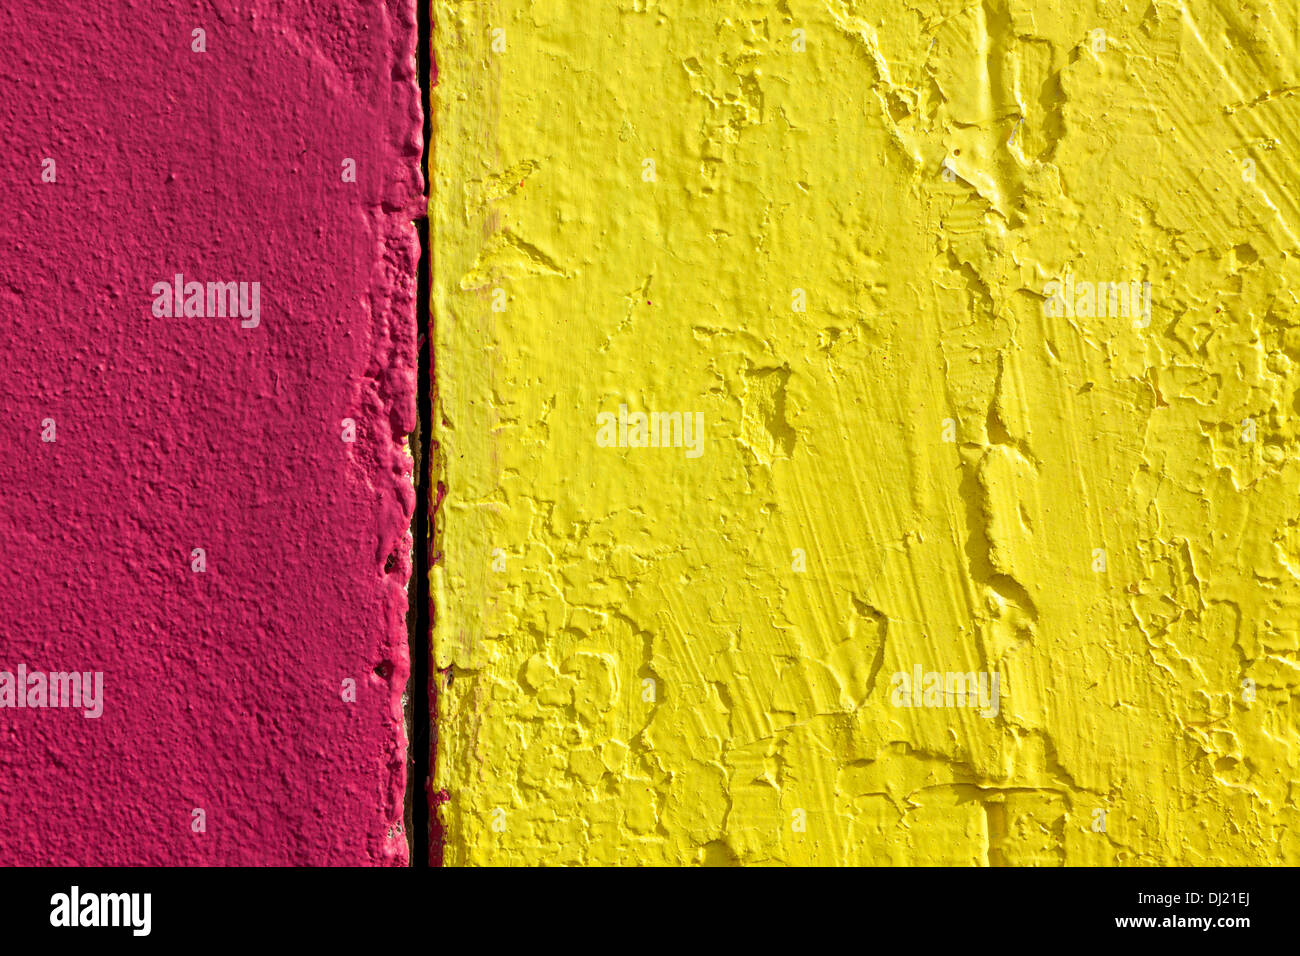 Vibrant yellow and pink wall background Stock Photo